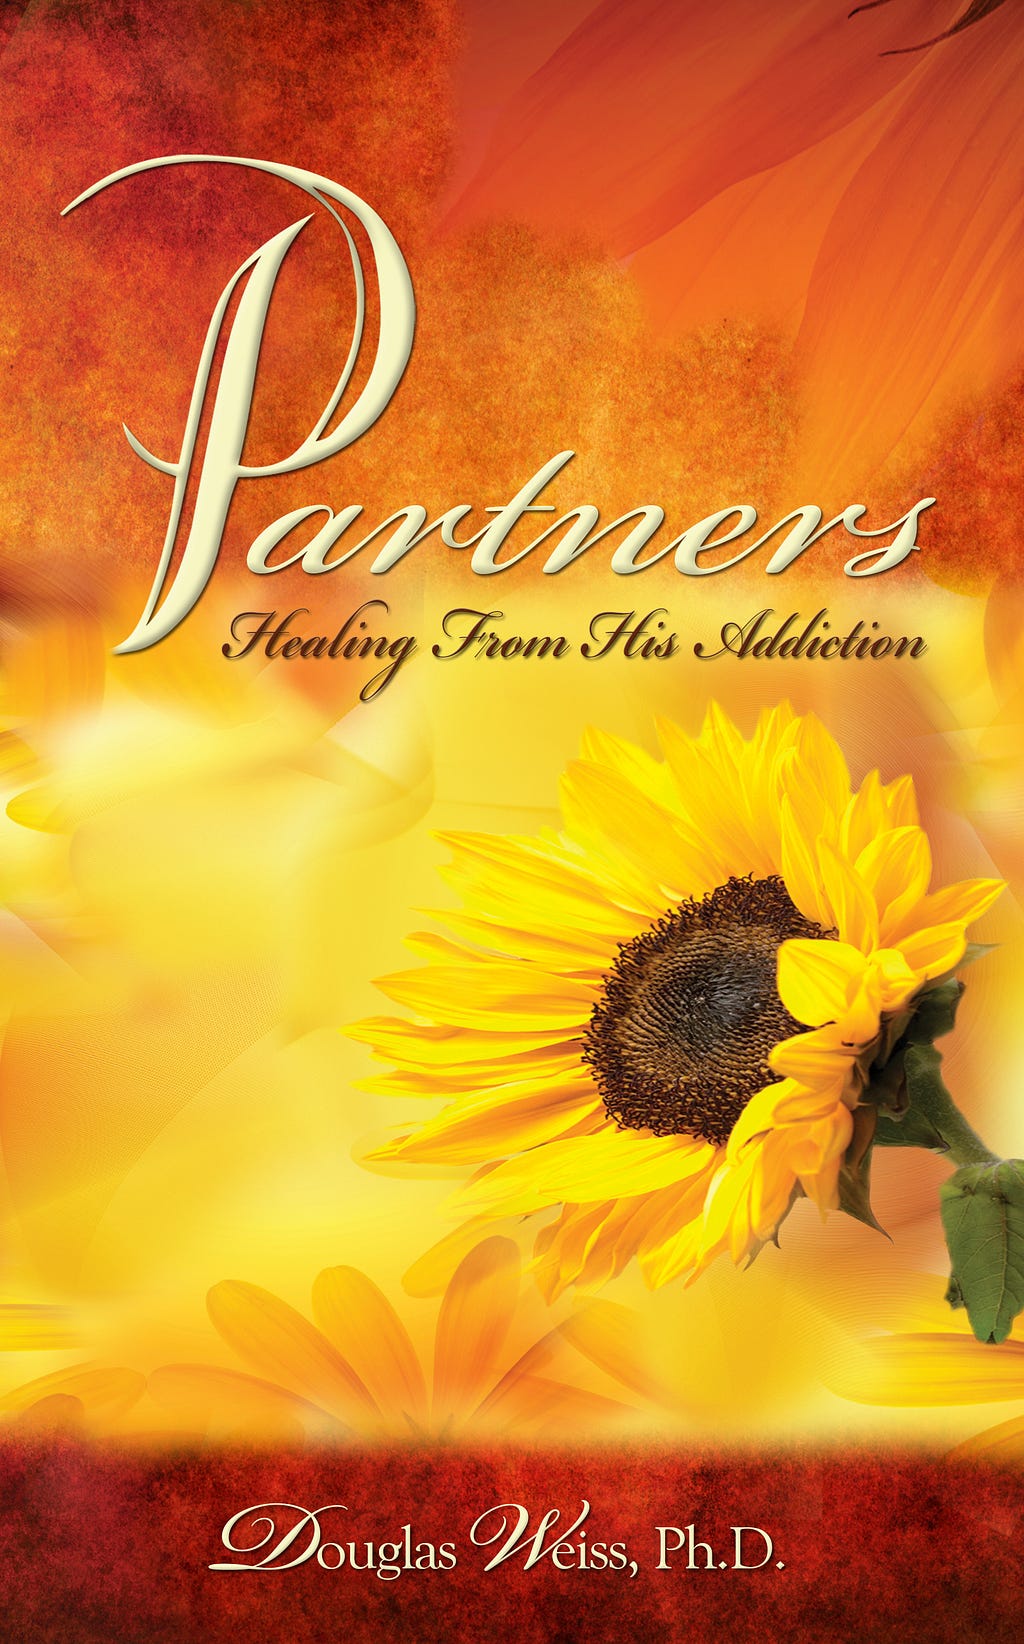 Partners-Healing-from-His-AddictionFT